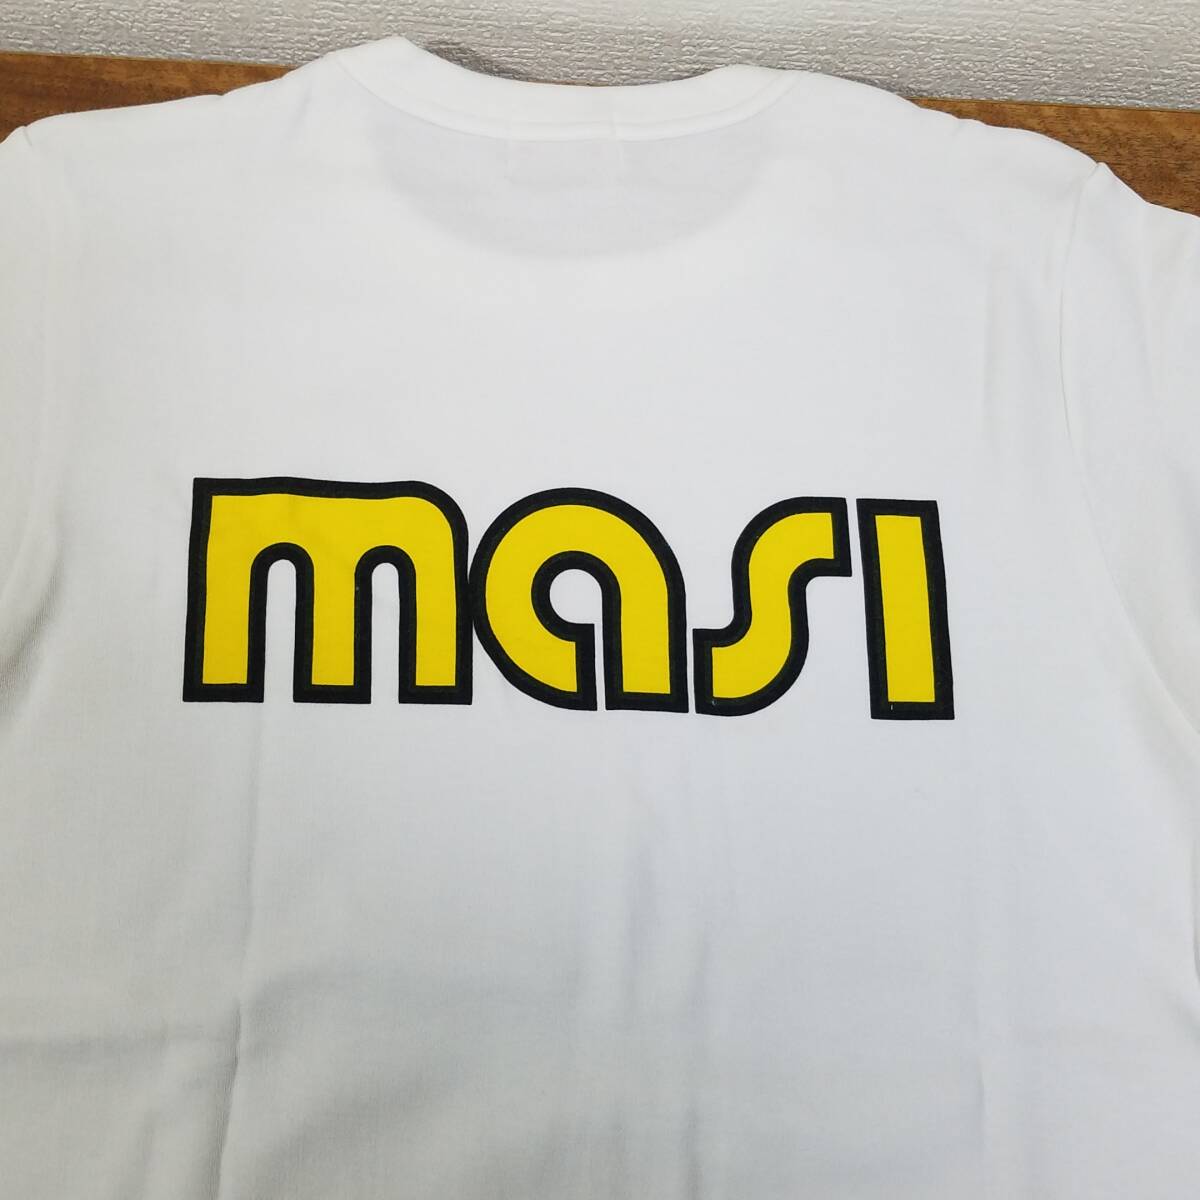 masi Tシャツ(М)　MADE IN JAPAN PEARL IZUMI CYCLE WEAR 　New Old Stock (NOS) 未使用品 ビンテージ_画像7